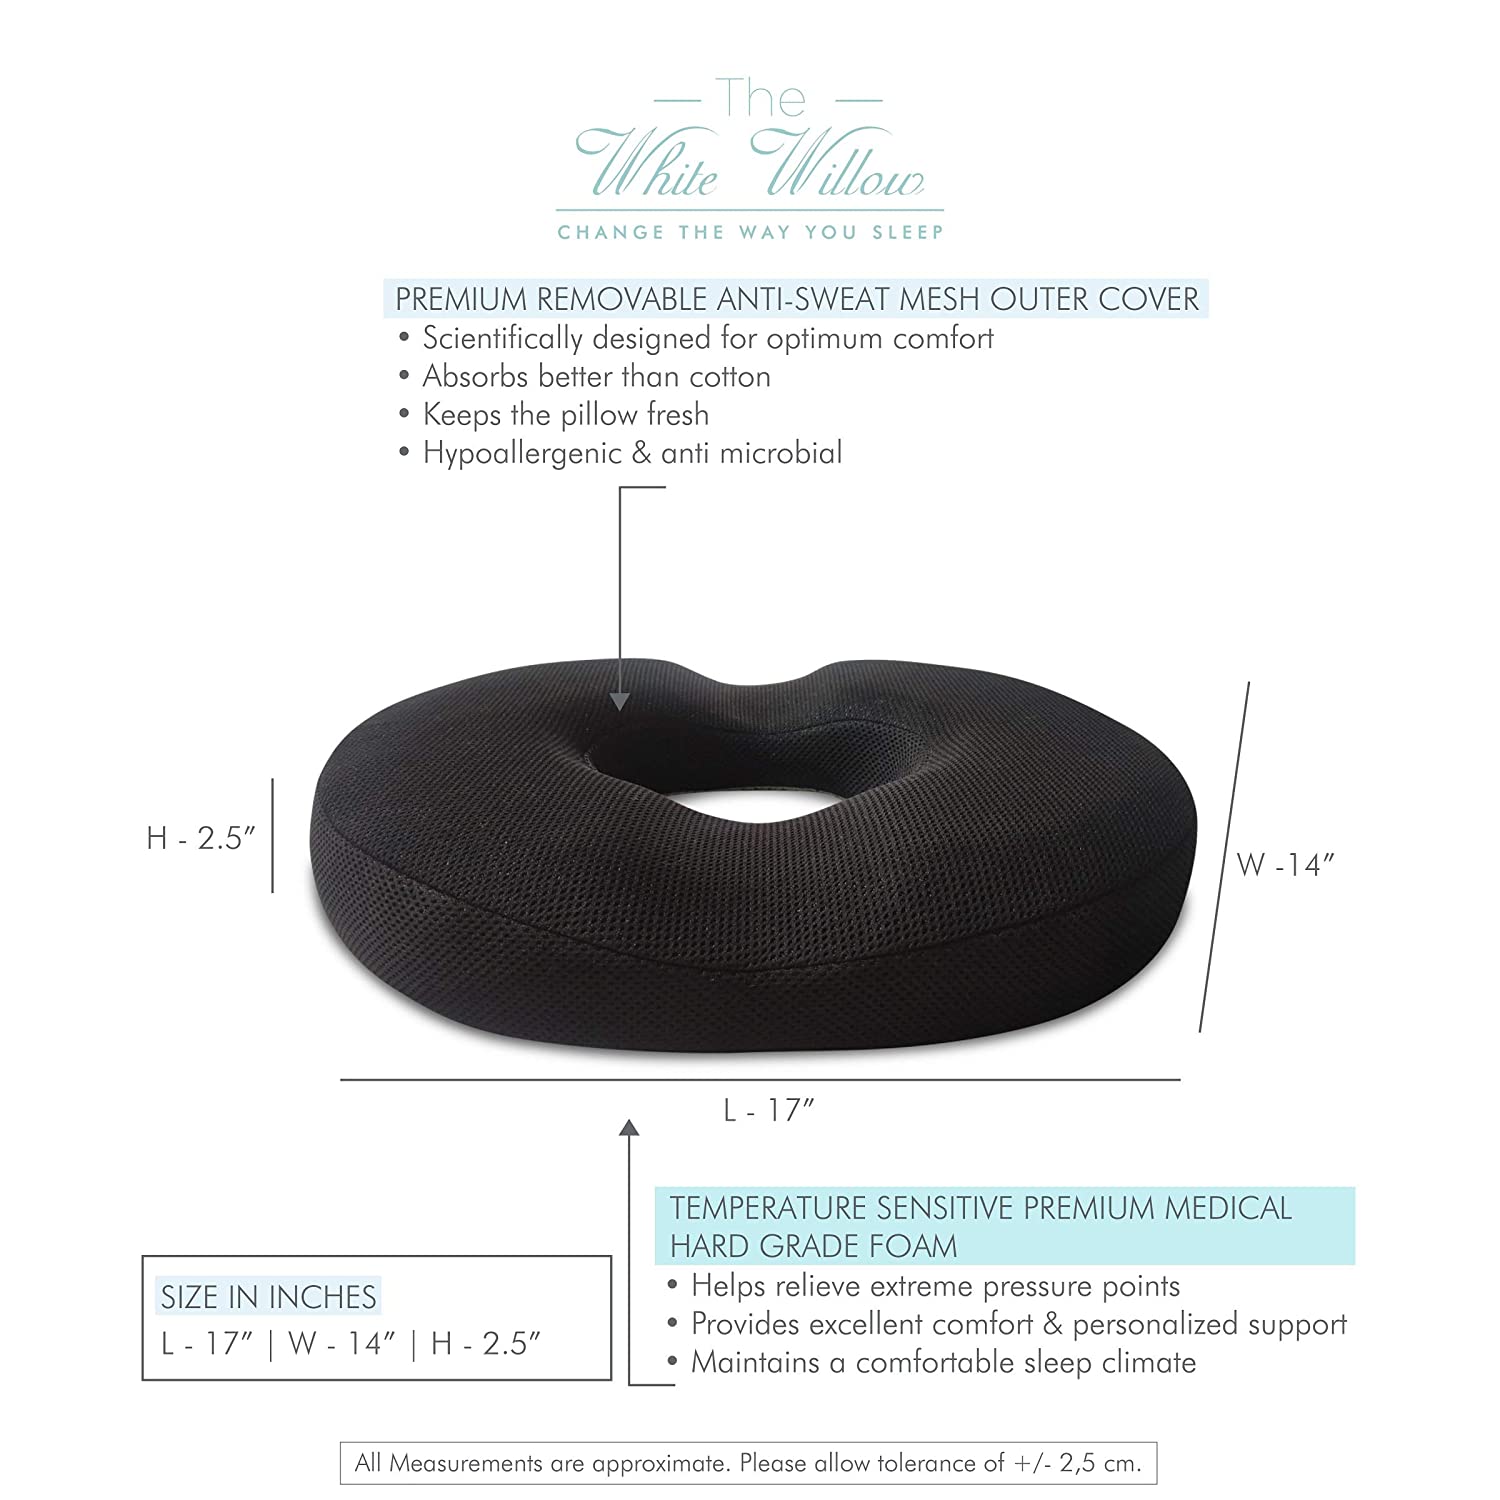 https://www.meddey.com/uploads/images/product_images/coccyx-cushion/1594879360_donut_pillow-meddey_image_2.jpg